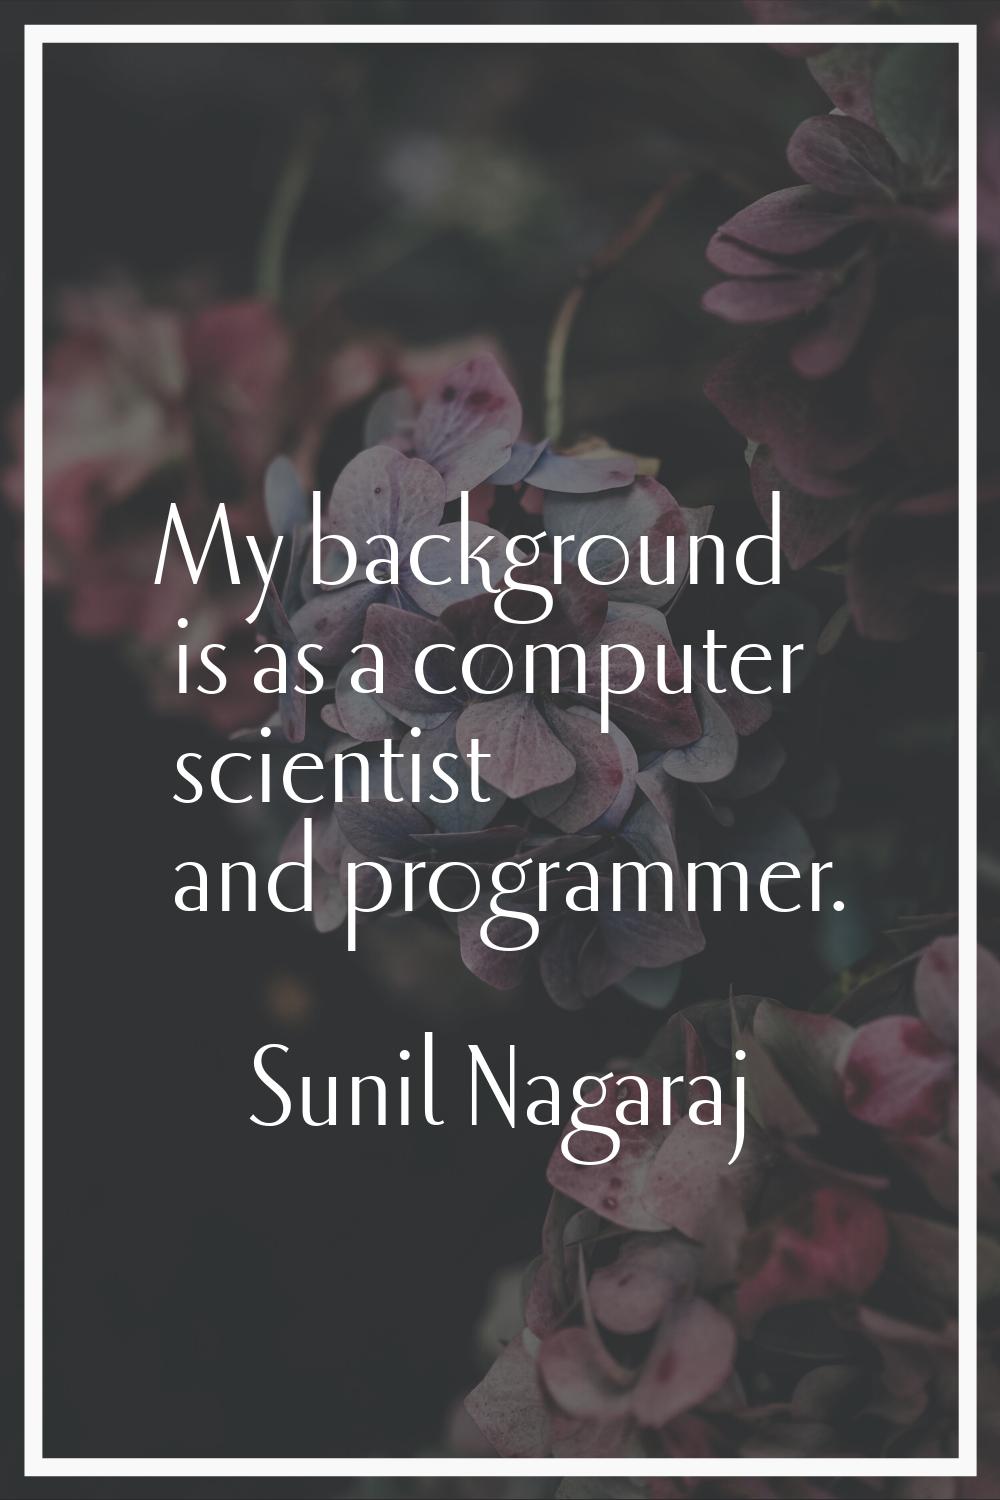 My background is as a computer scientist and programmer.